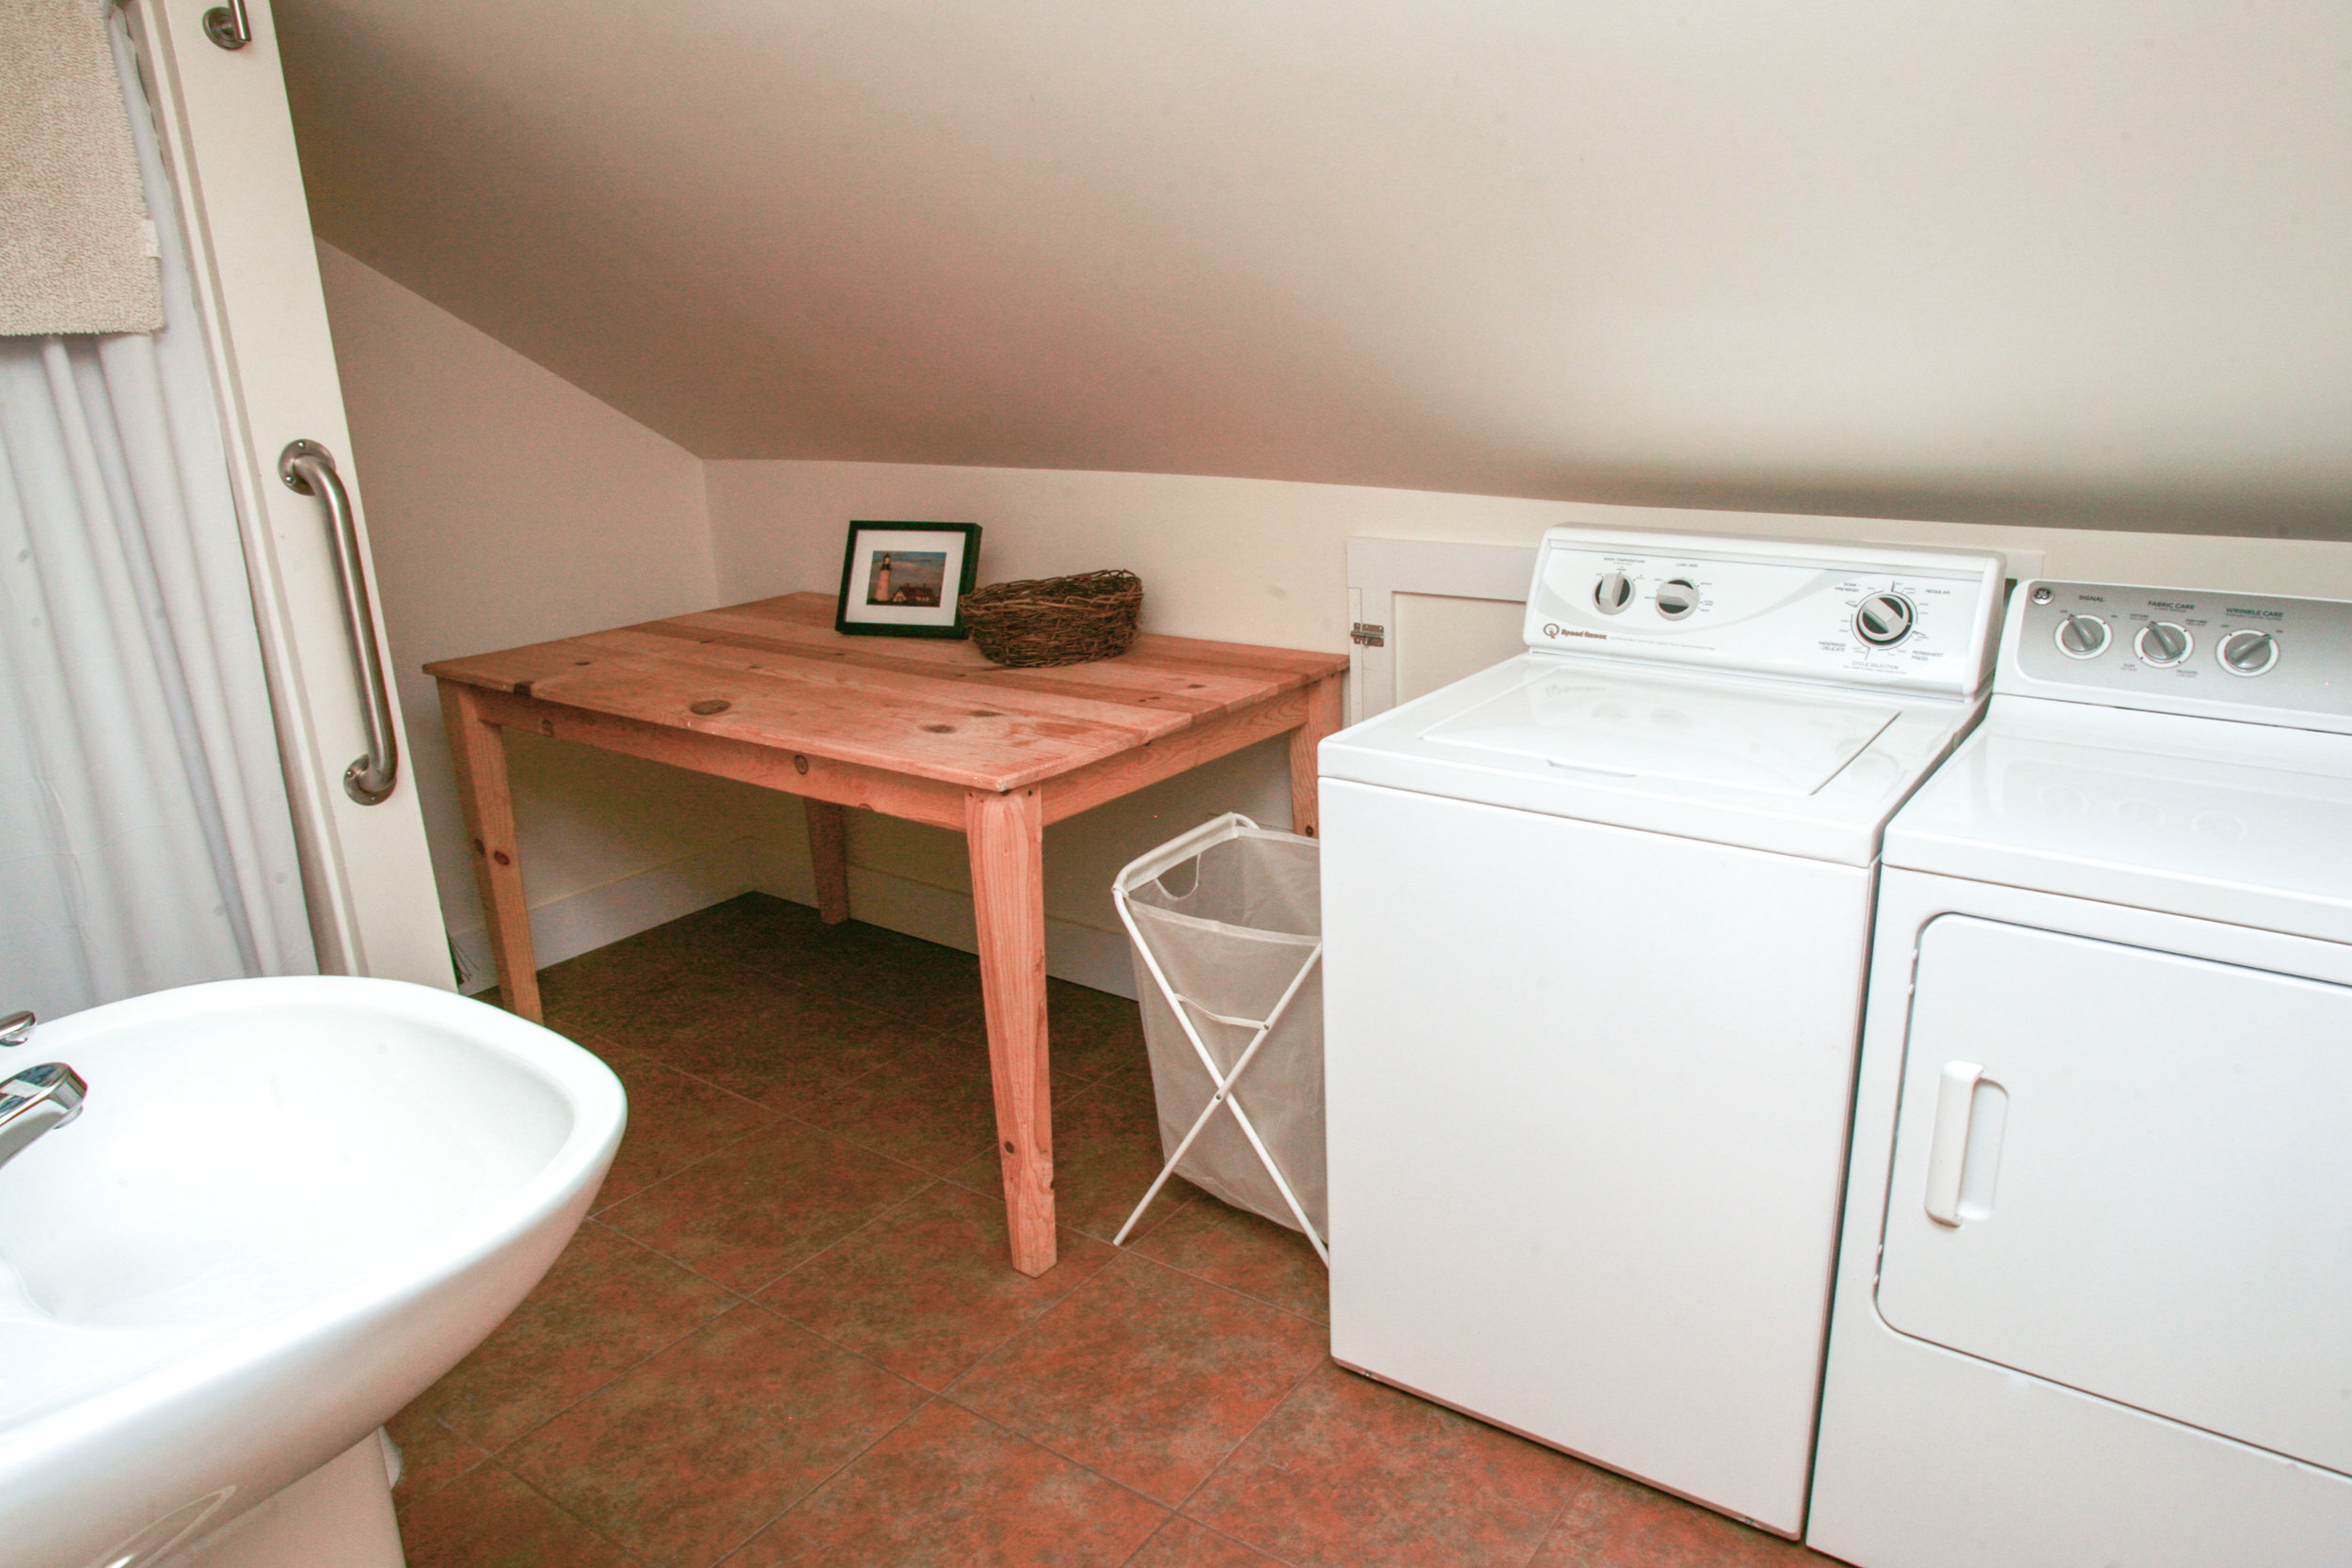 Bathroom has full capacity commercial washer and dryer for your use.